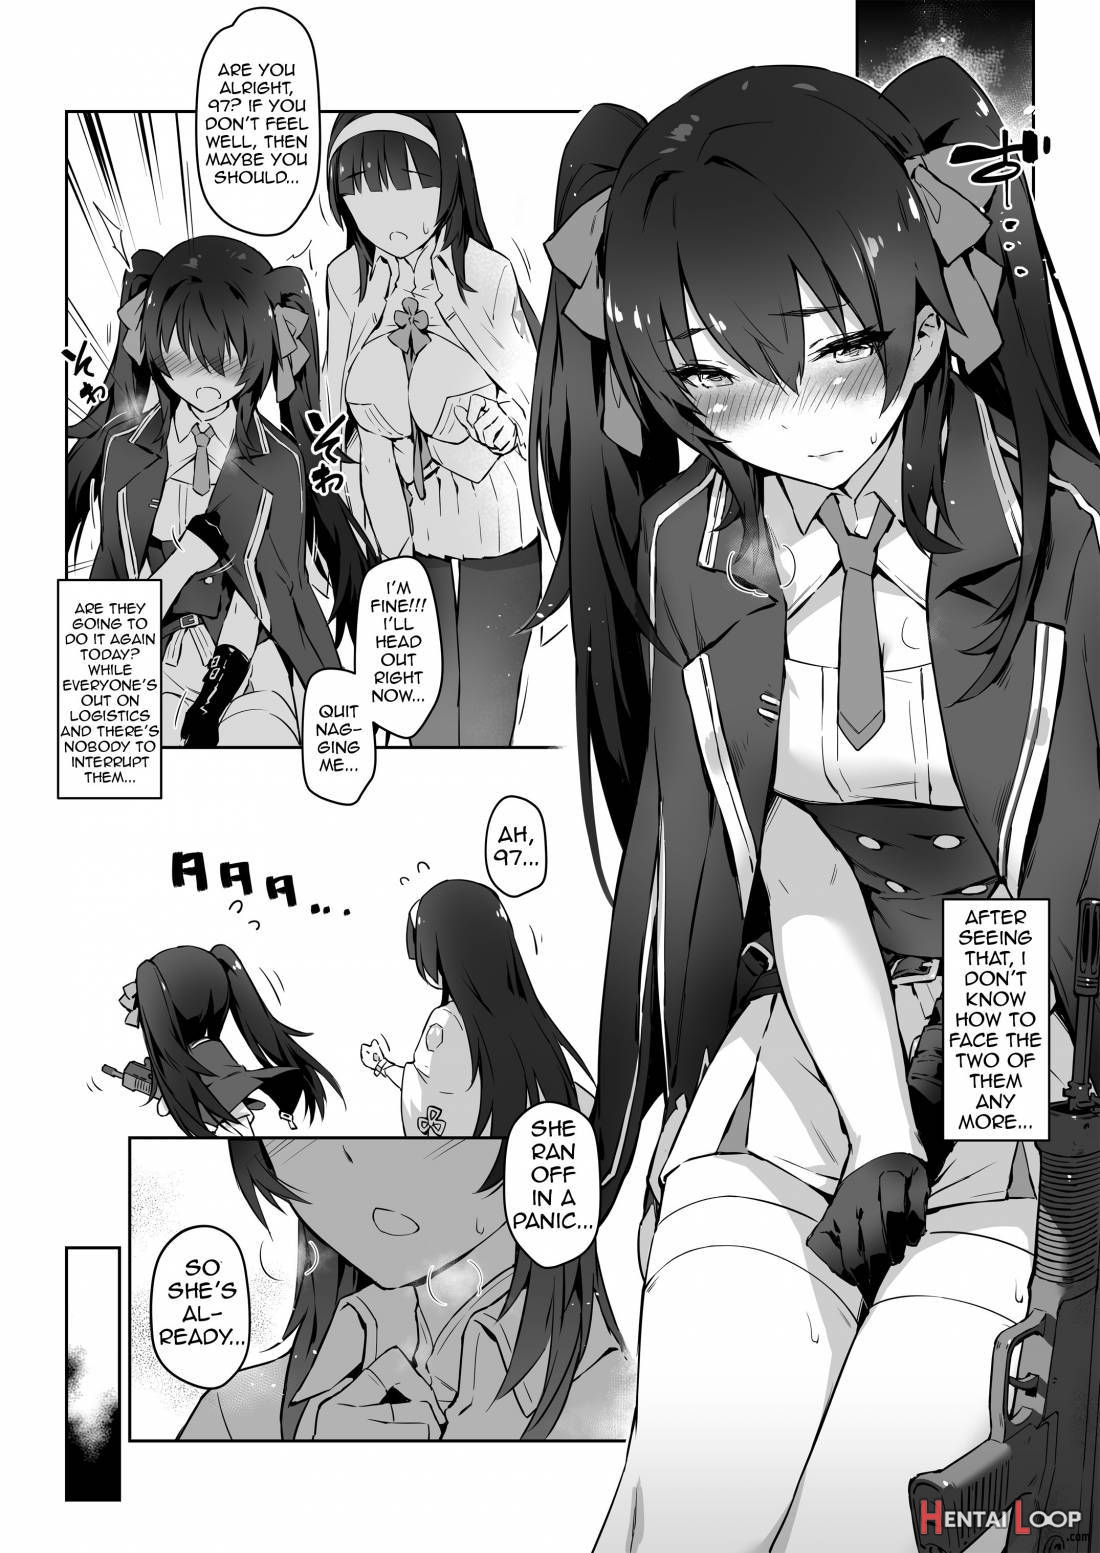 Type 95 Type 97, Let Your Big Sister Teach You! page 5